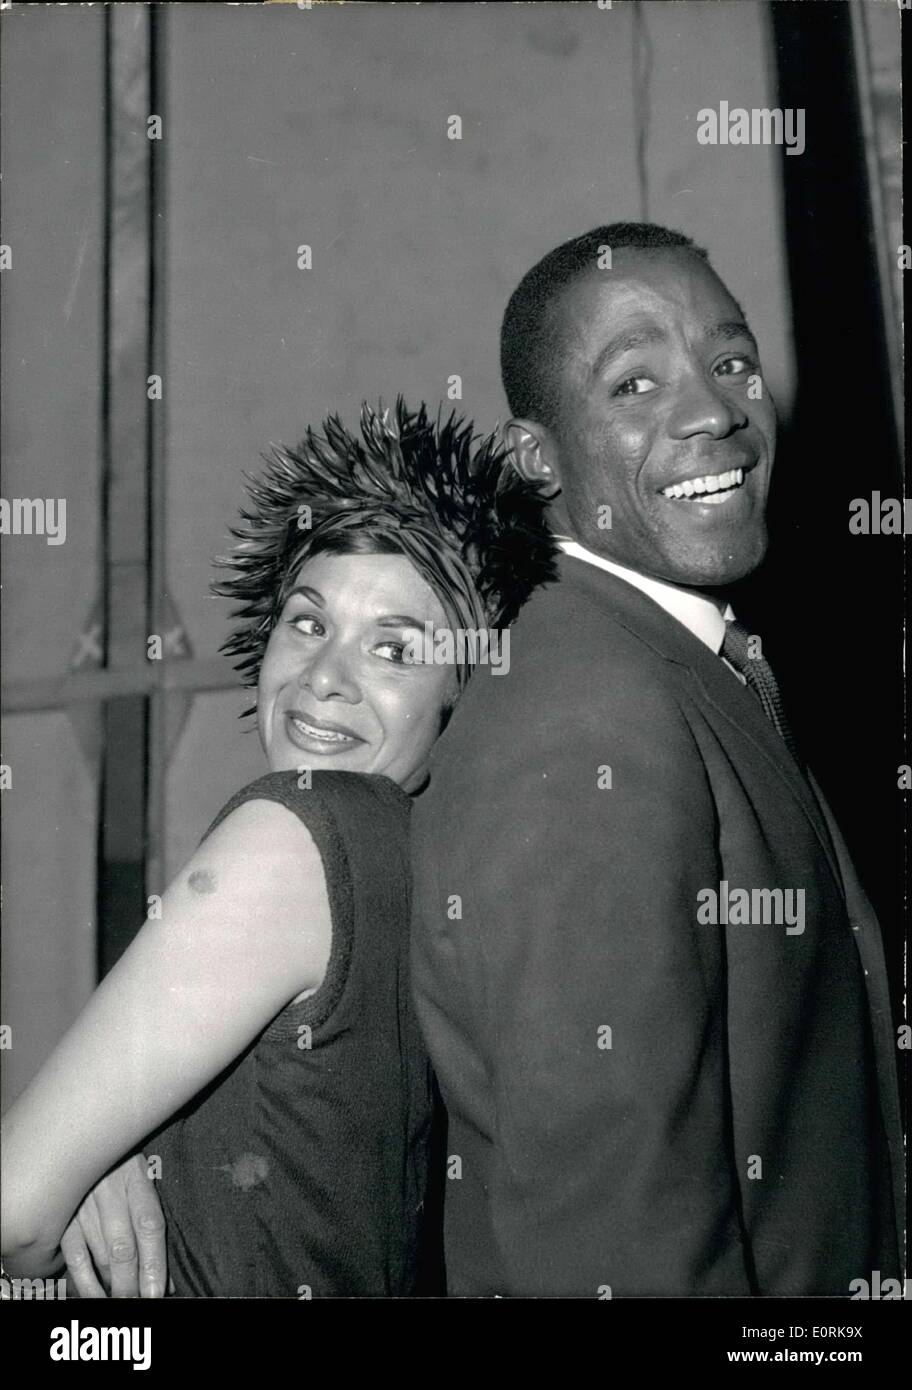 Nov. 03, 1959 - Katherine Dunham will present her ballet company in Paris at the Sarah Bernhardt Theater after a 10 year absence. She is pictured here with her partner Vanoye Aikens. Stock Photo